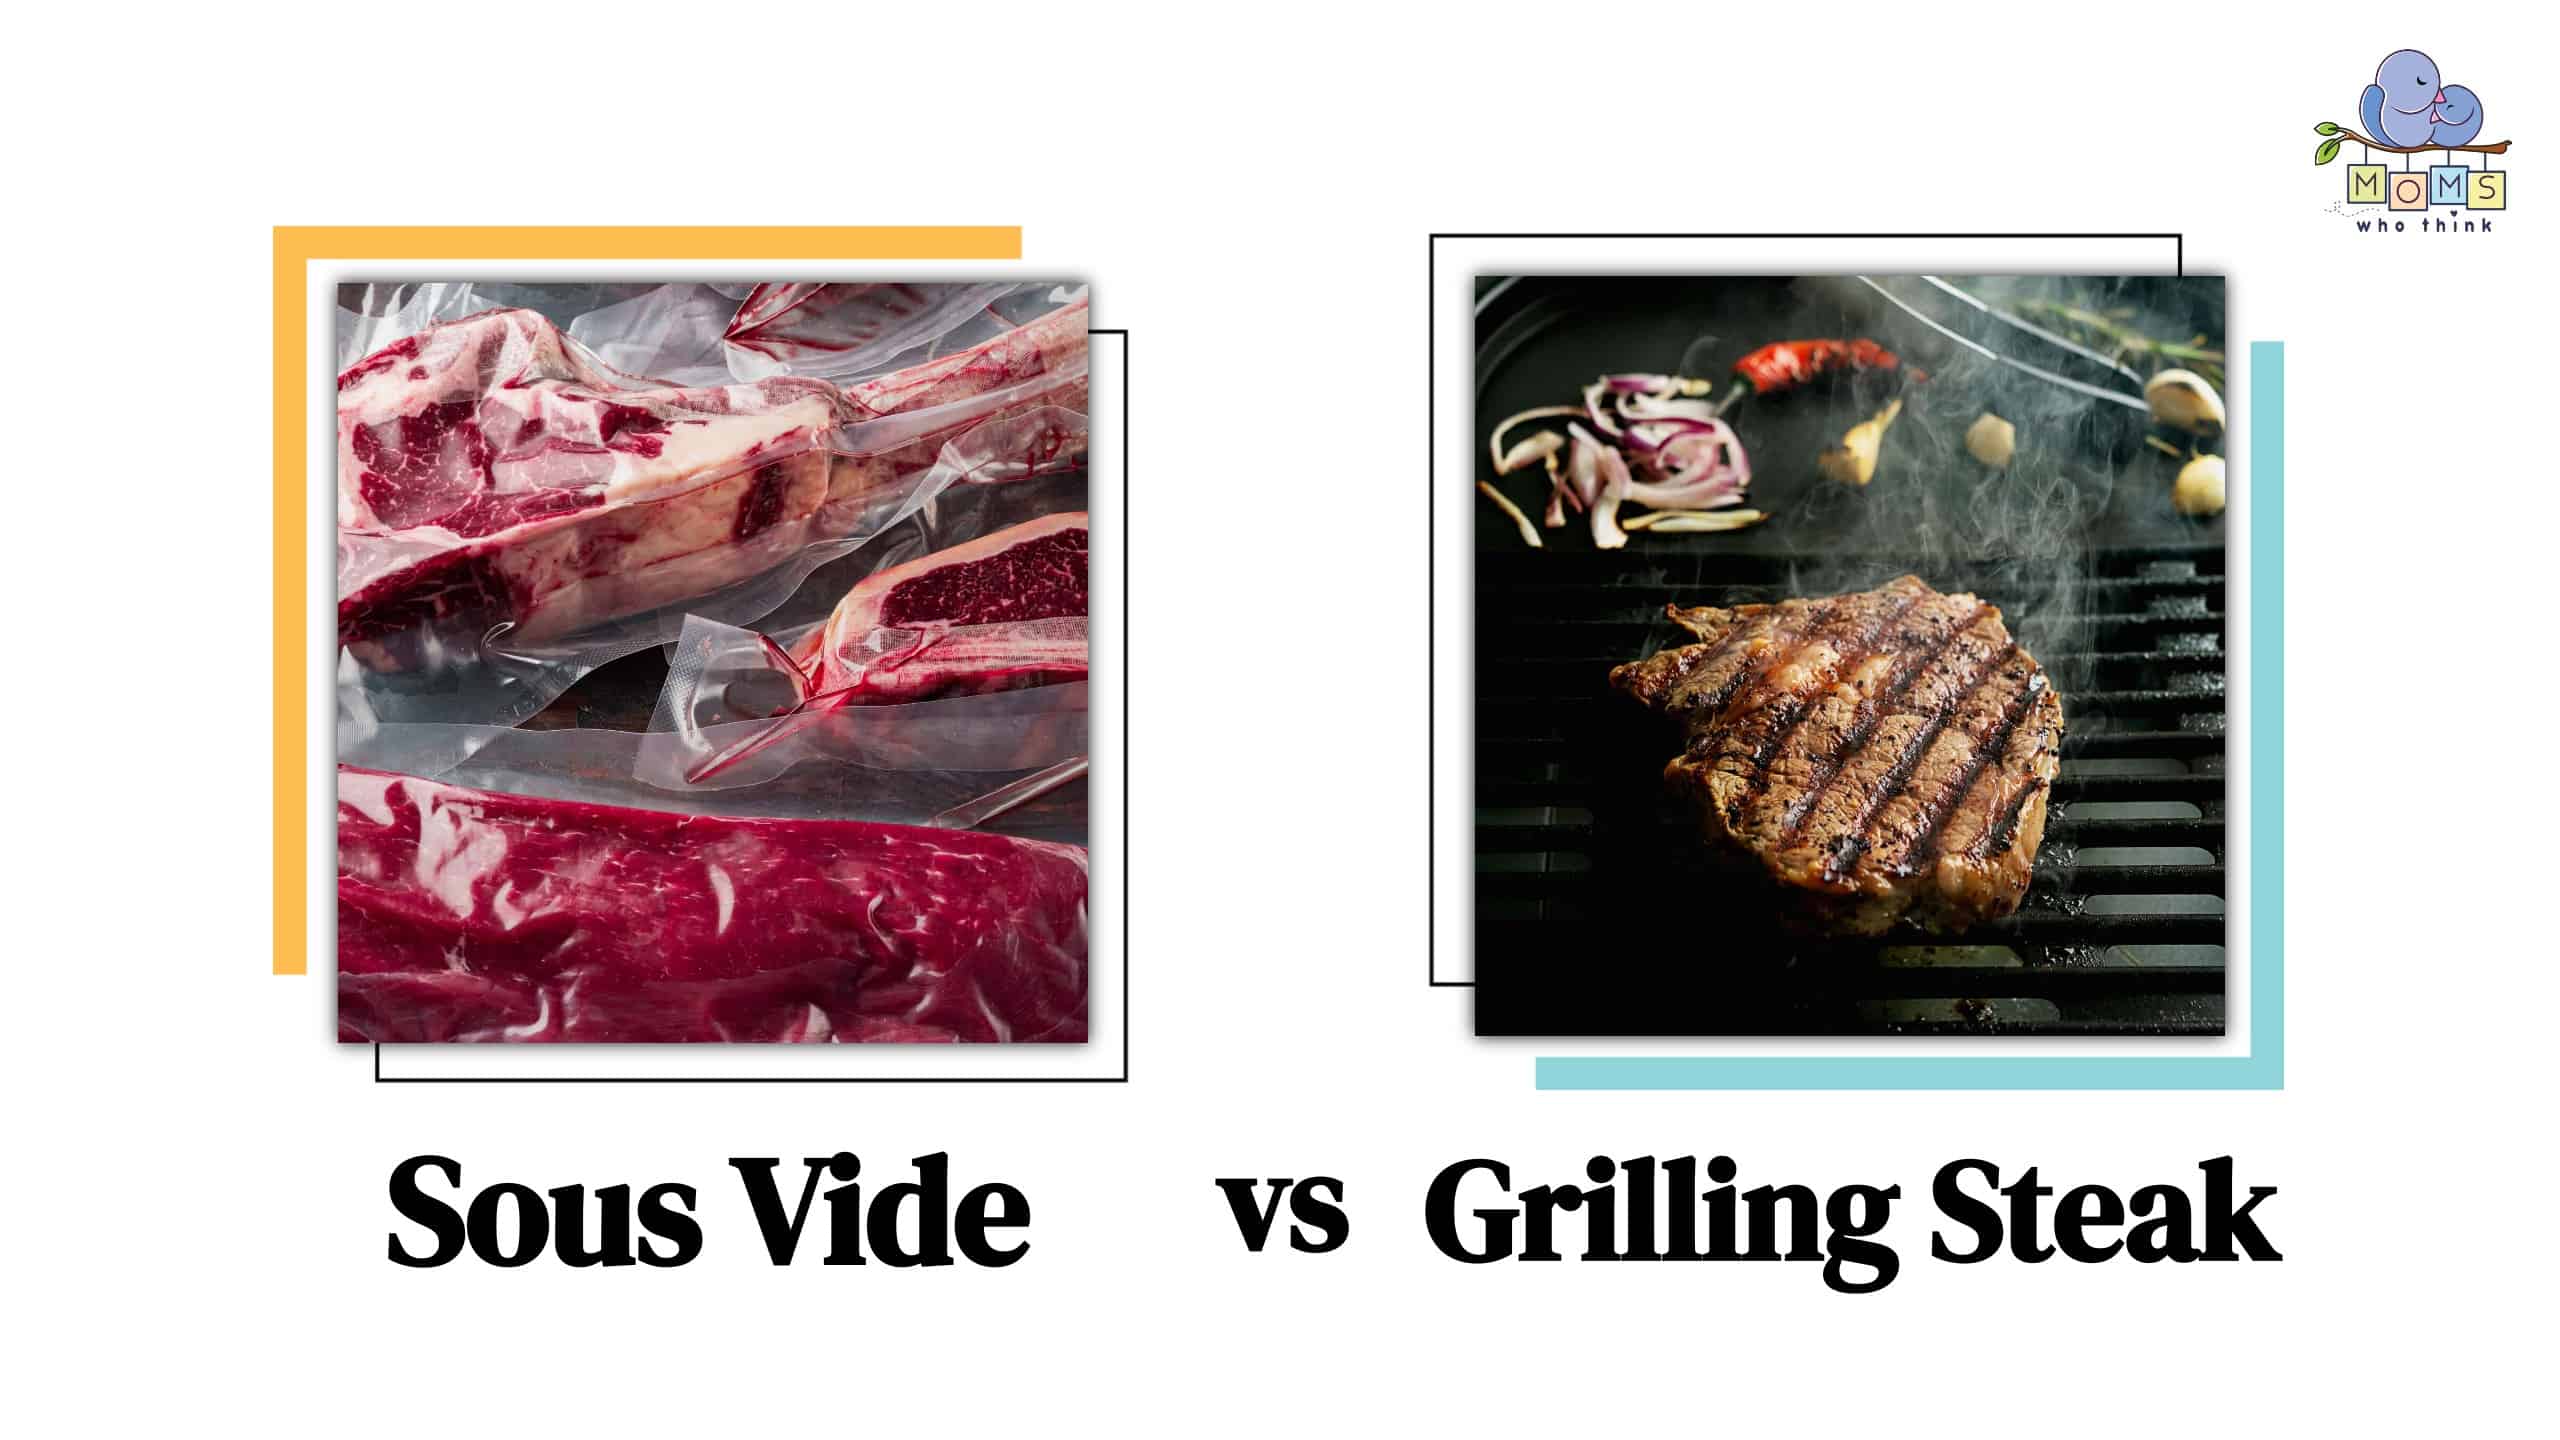 Sous Vide Steak vs. Grilled: Which is the Way to Cook a Steak?